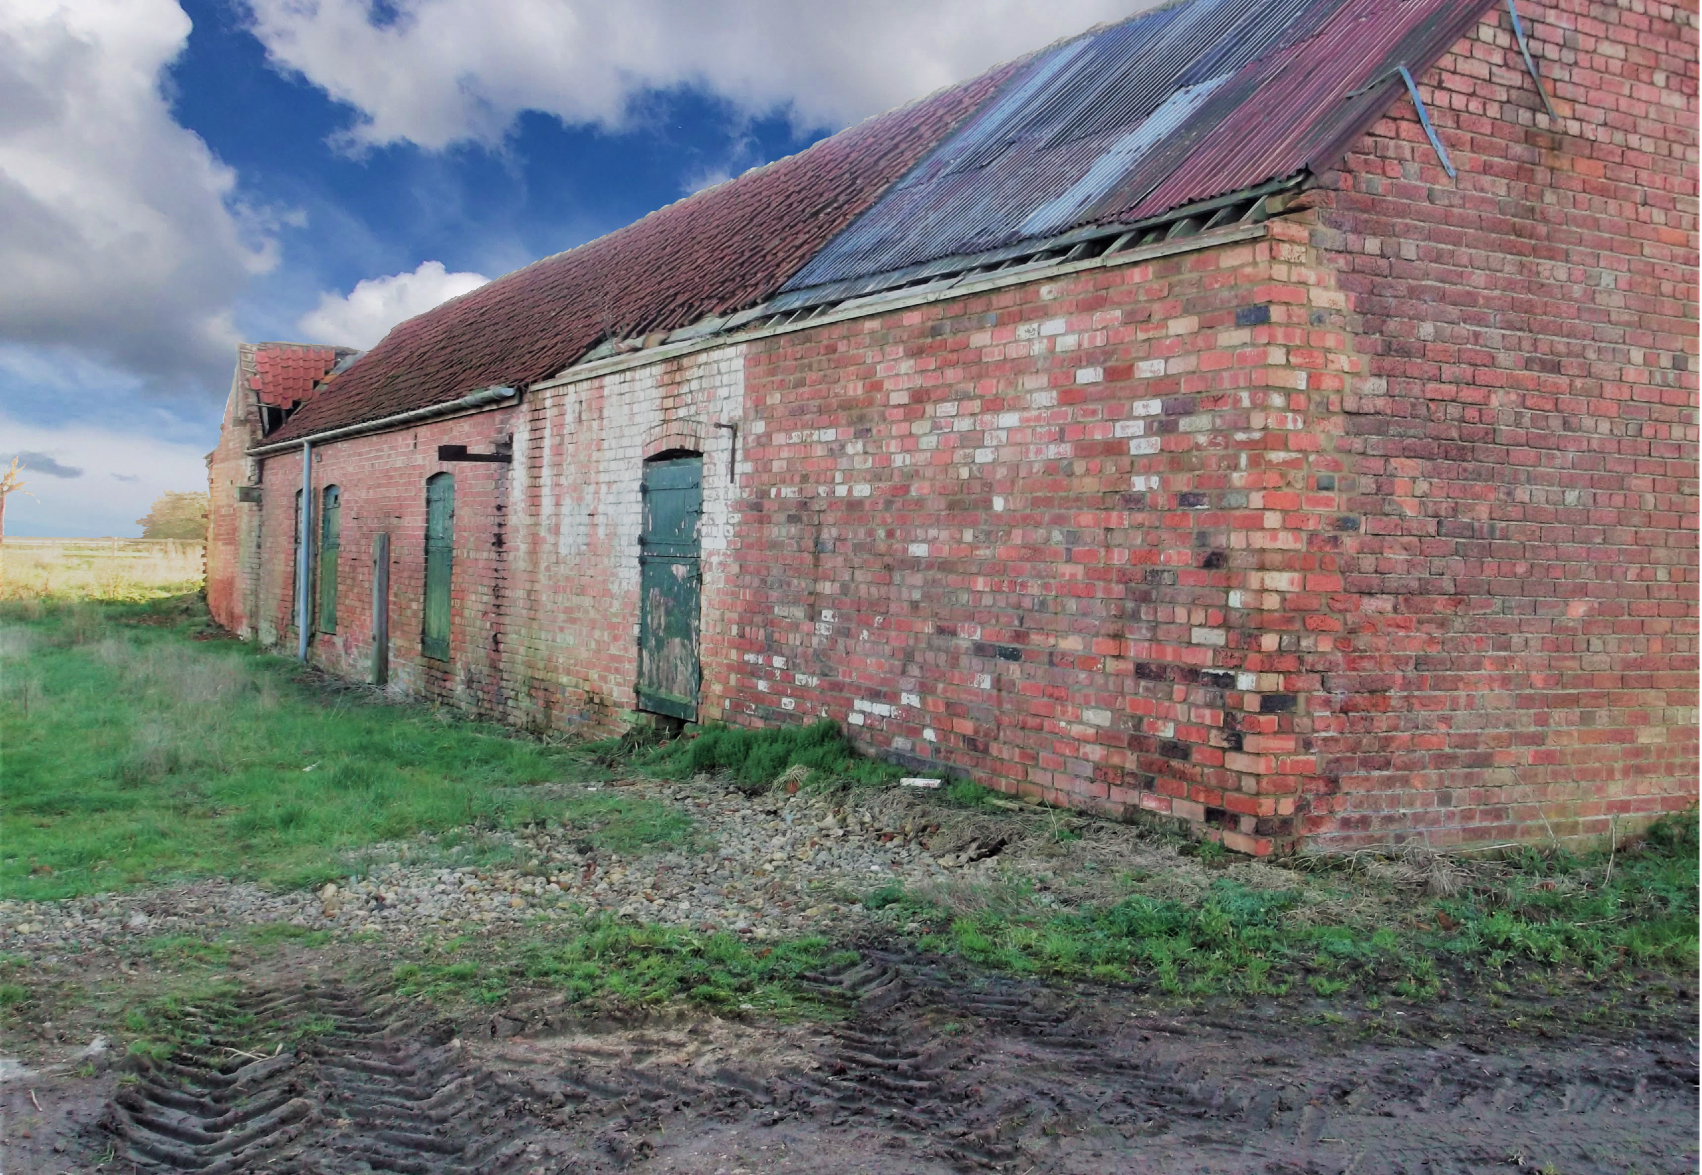 Planning permission for barn conversion of heitage stable blocks to form new arts and crafts studios. In partnership with RAW Designs Lincolnshire